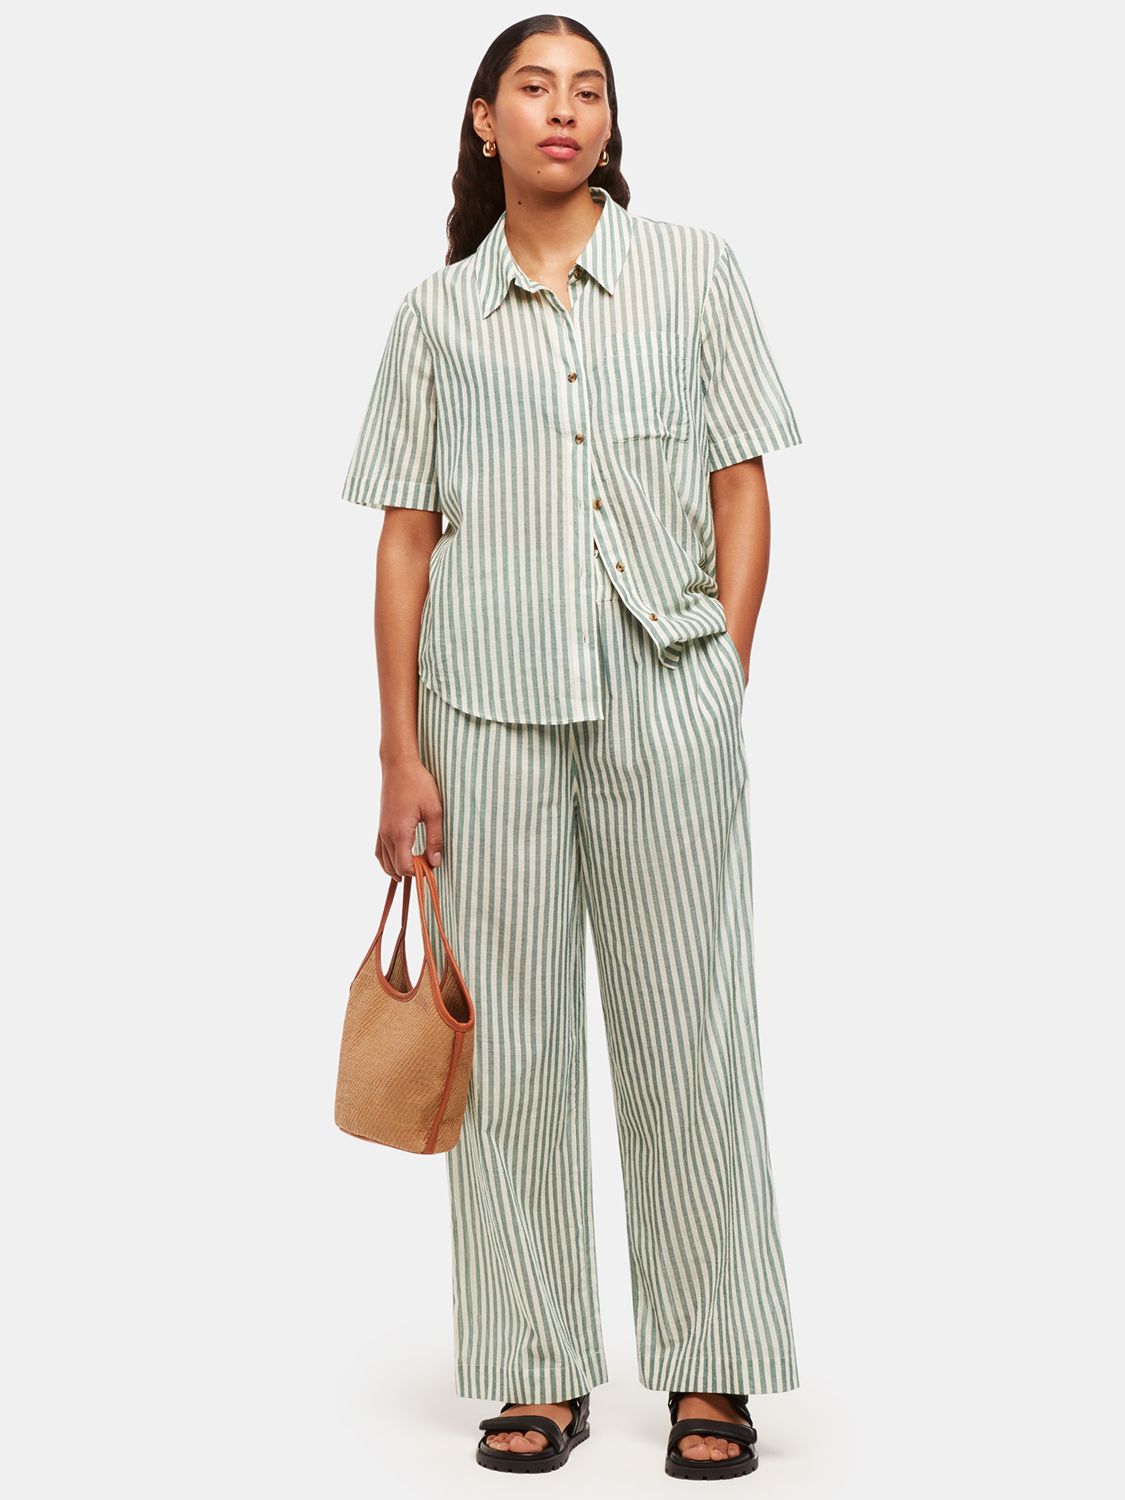 Buy Whistles Stripe Beach Cotton Trousers, Green/White Online at johnlewis.com